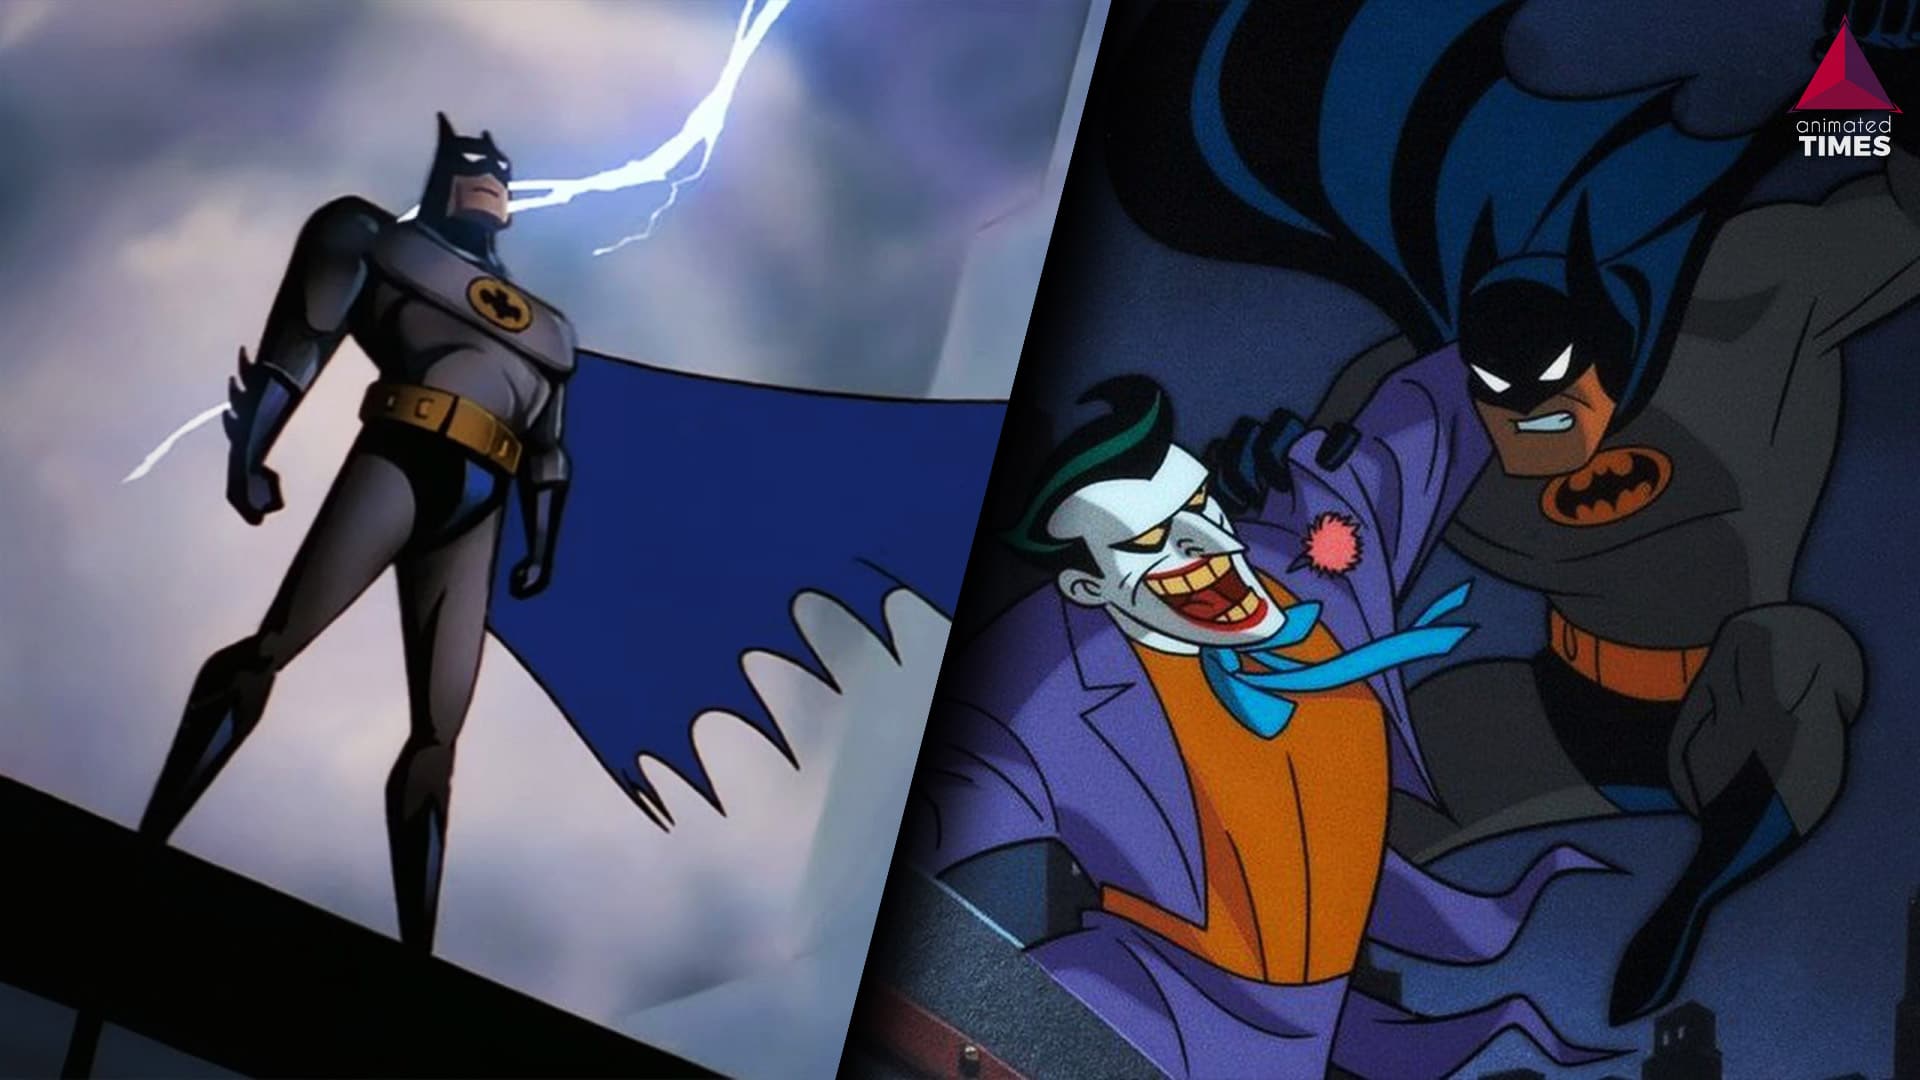 Batman: The Animated Series Reboot Coming To HBO Max Says Kevin Smith